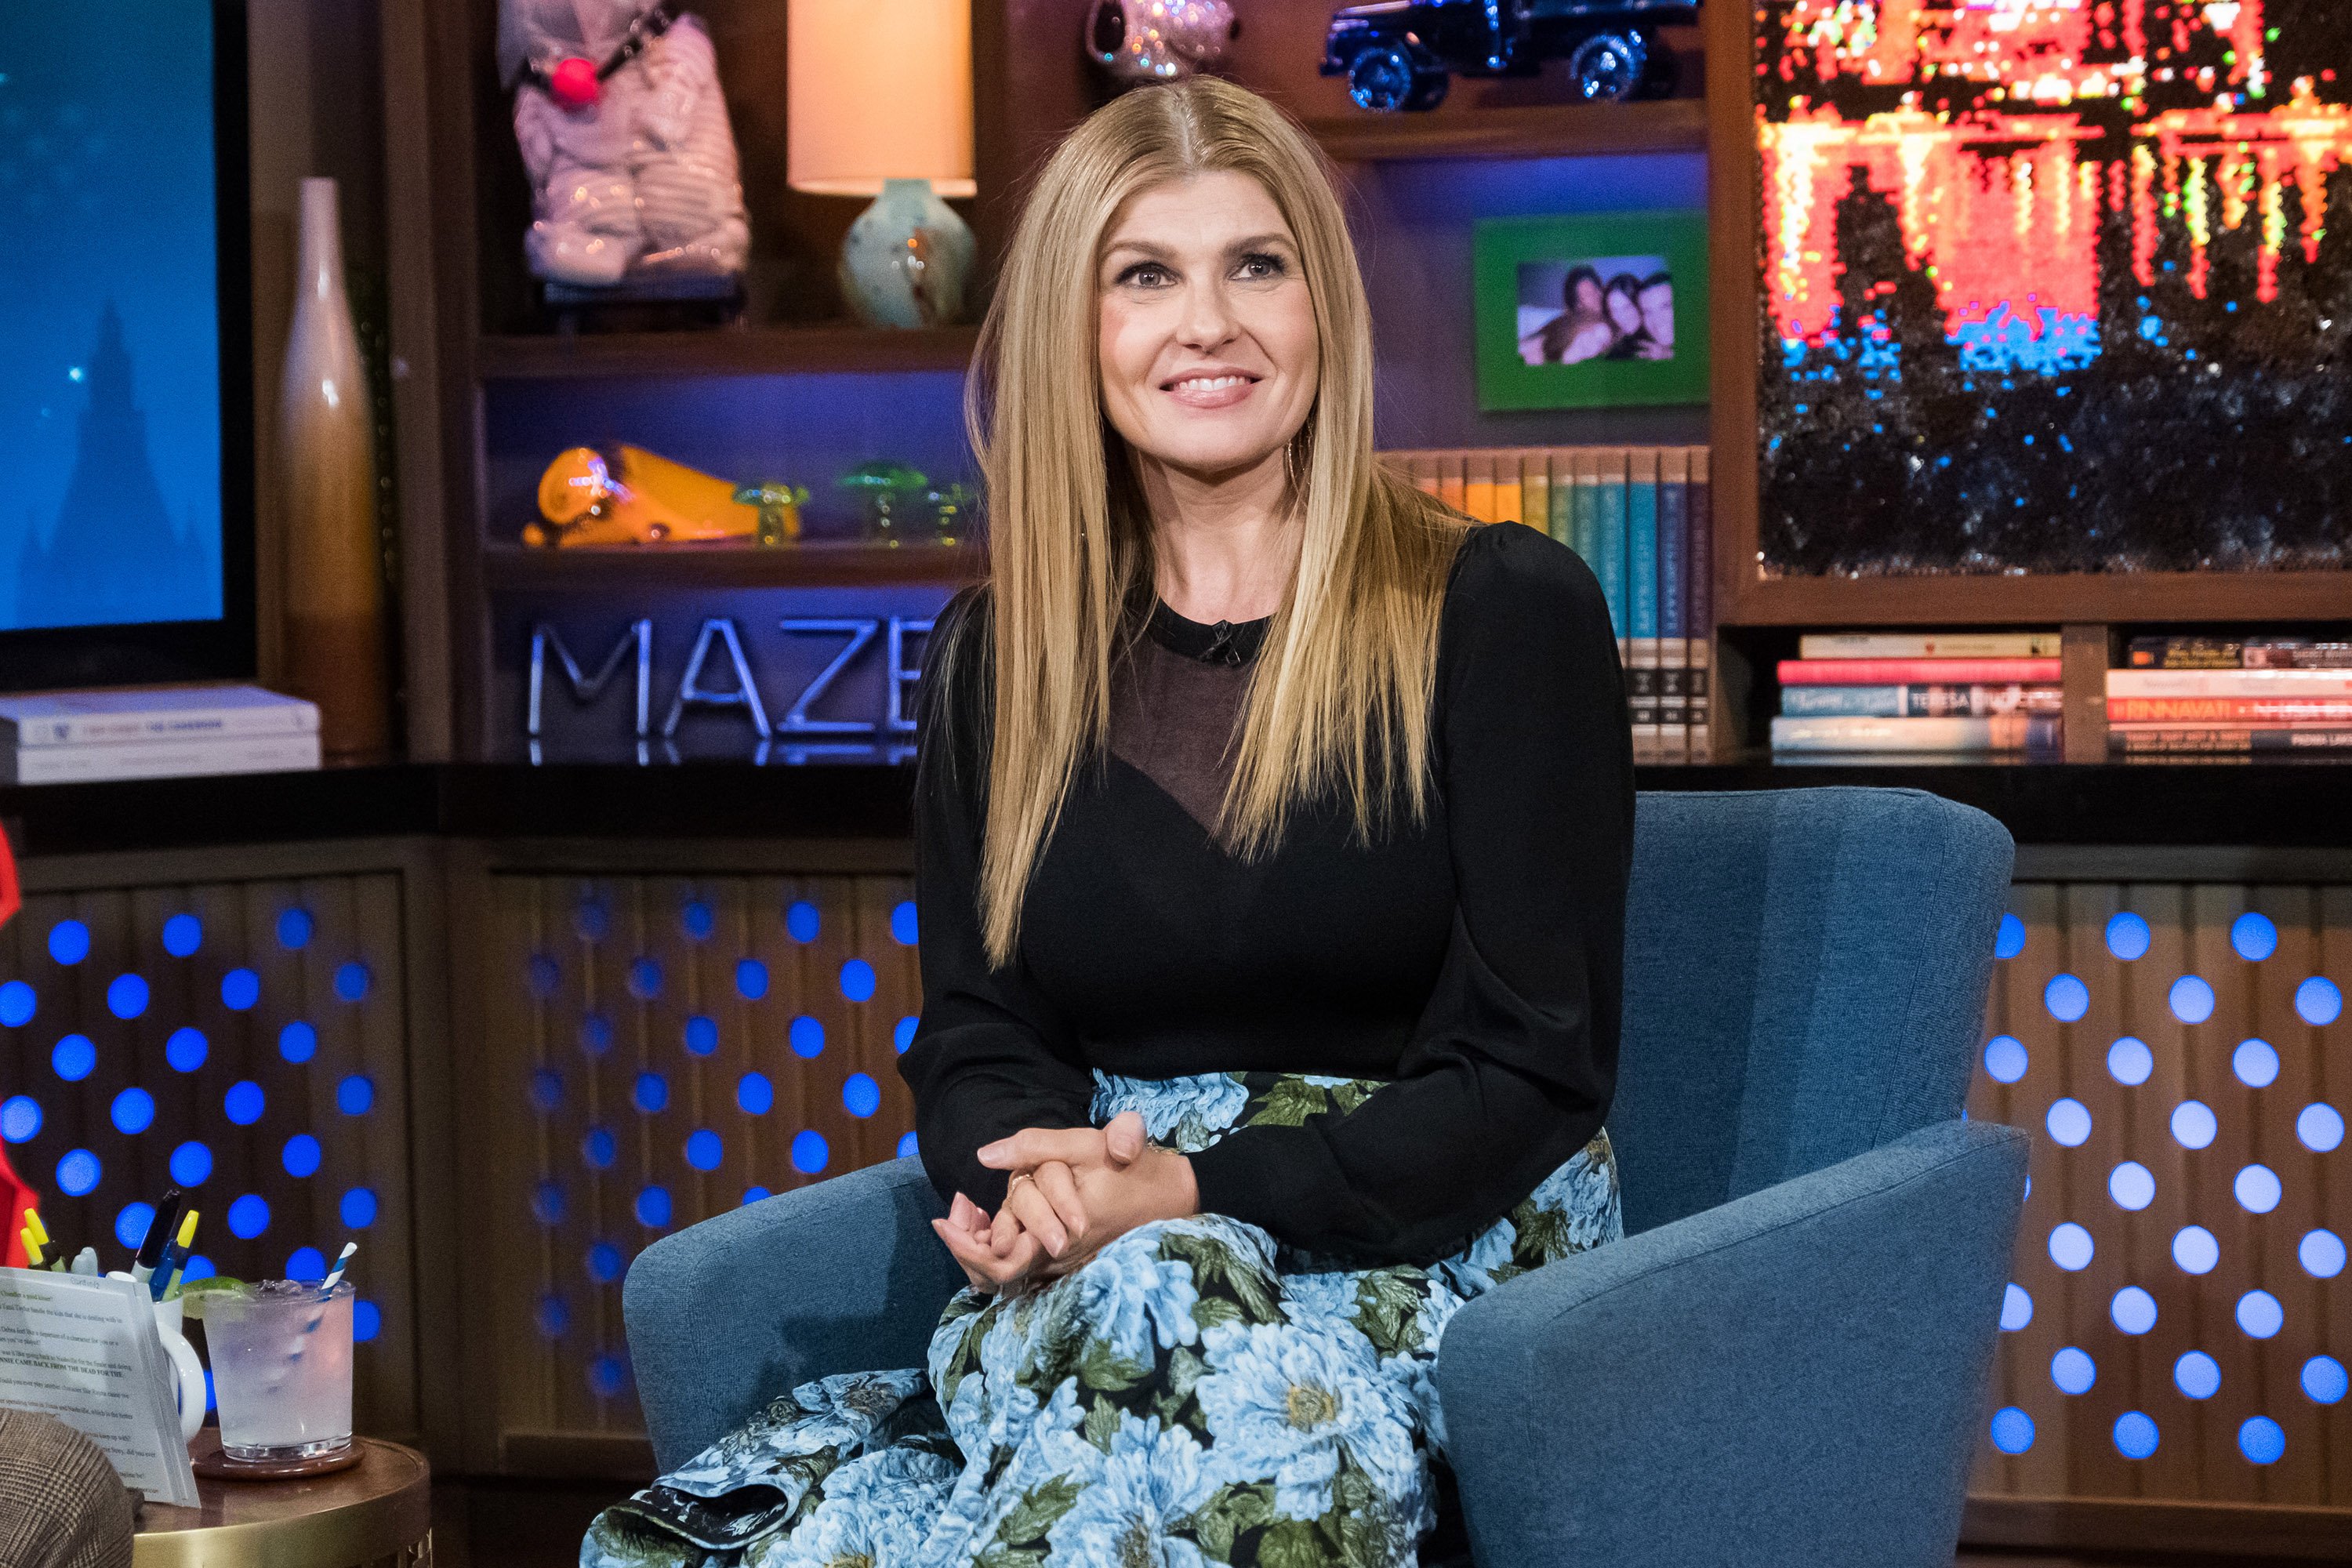 Connie Britton appears on season 15 of "Watch What Happens Live with Andy Cohen." | Source: Getty Images.